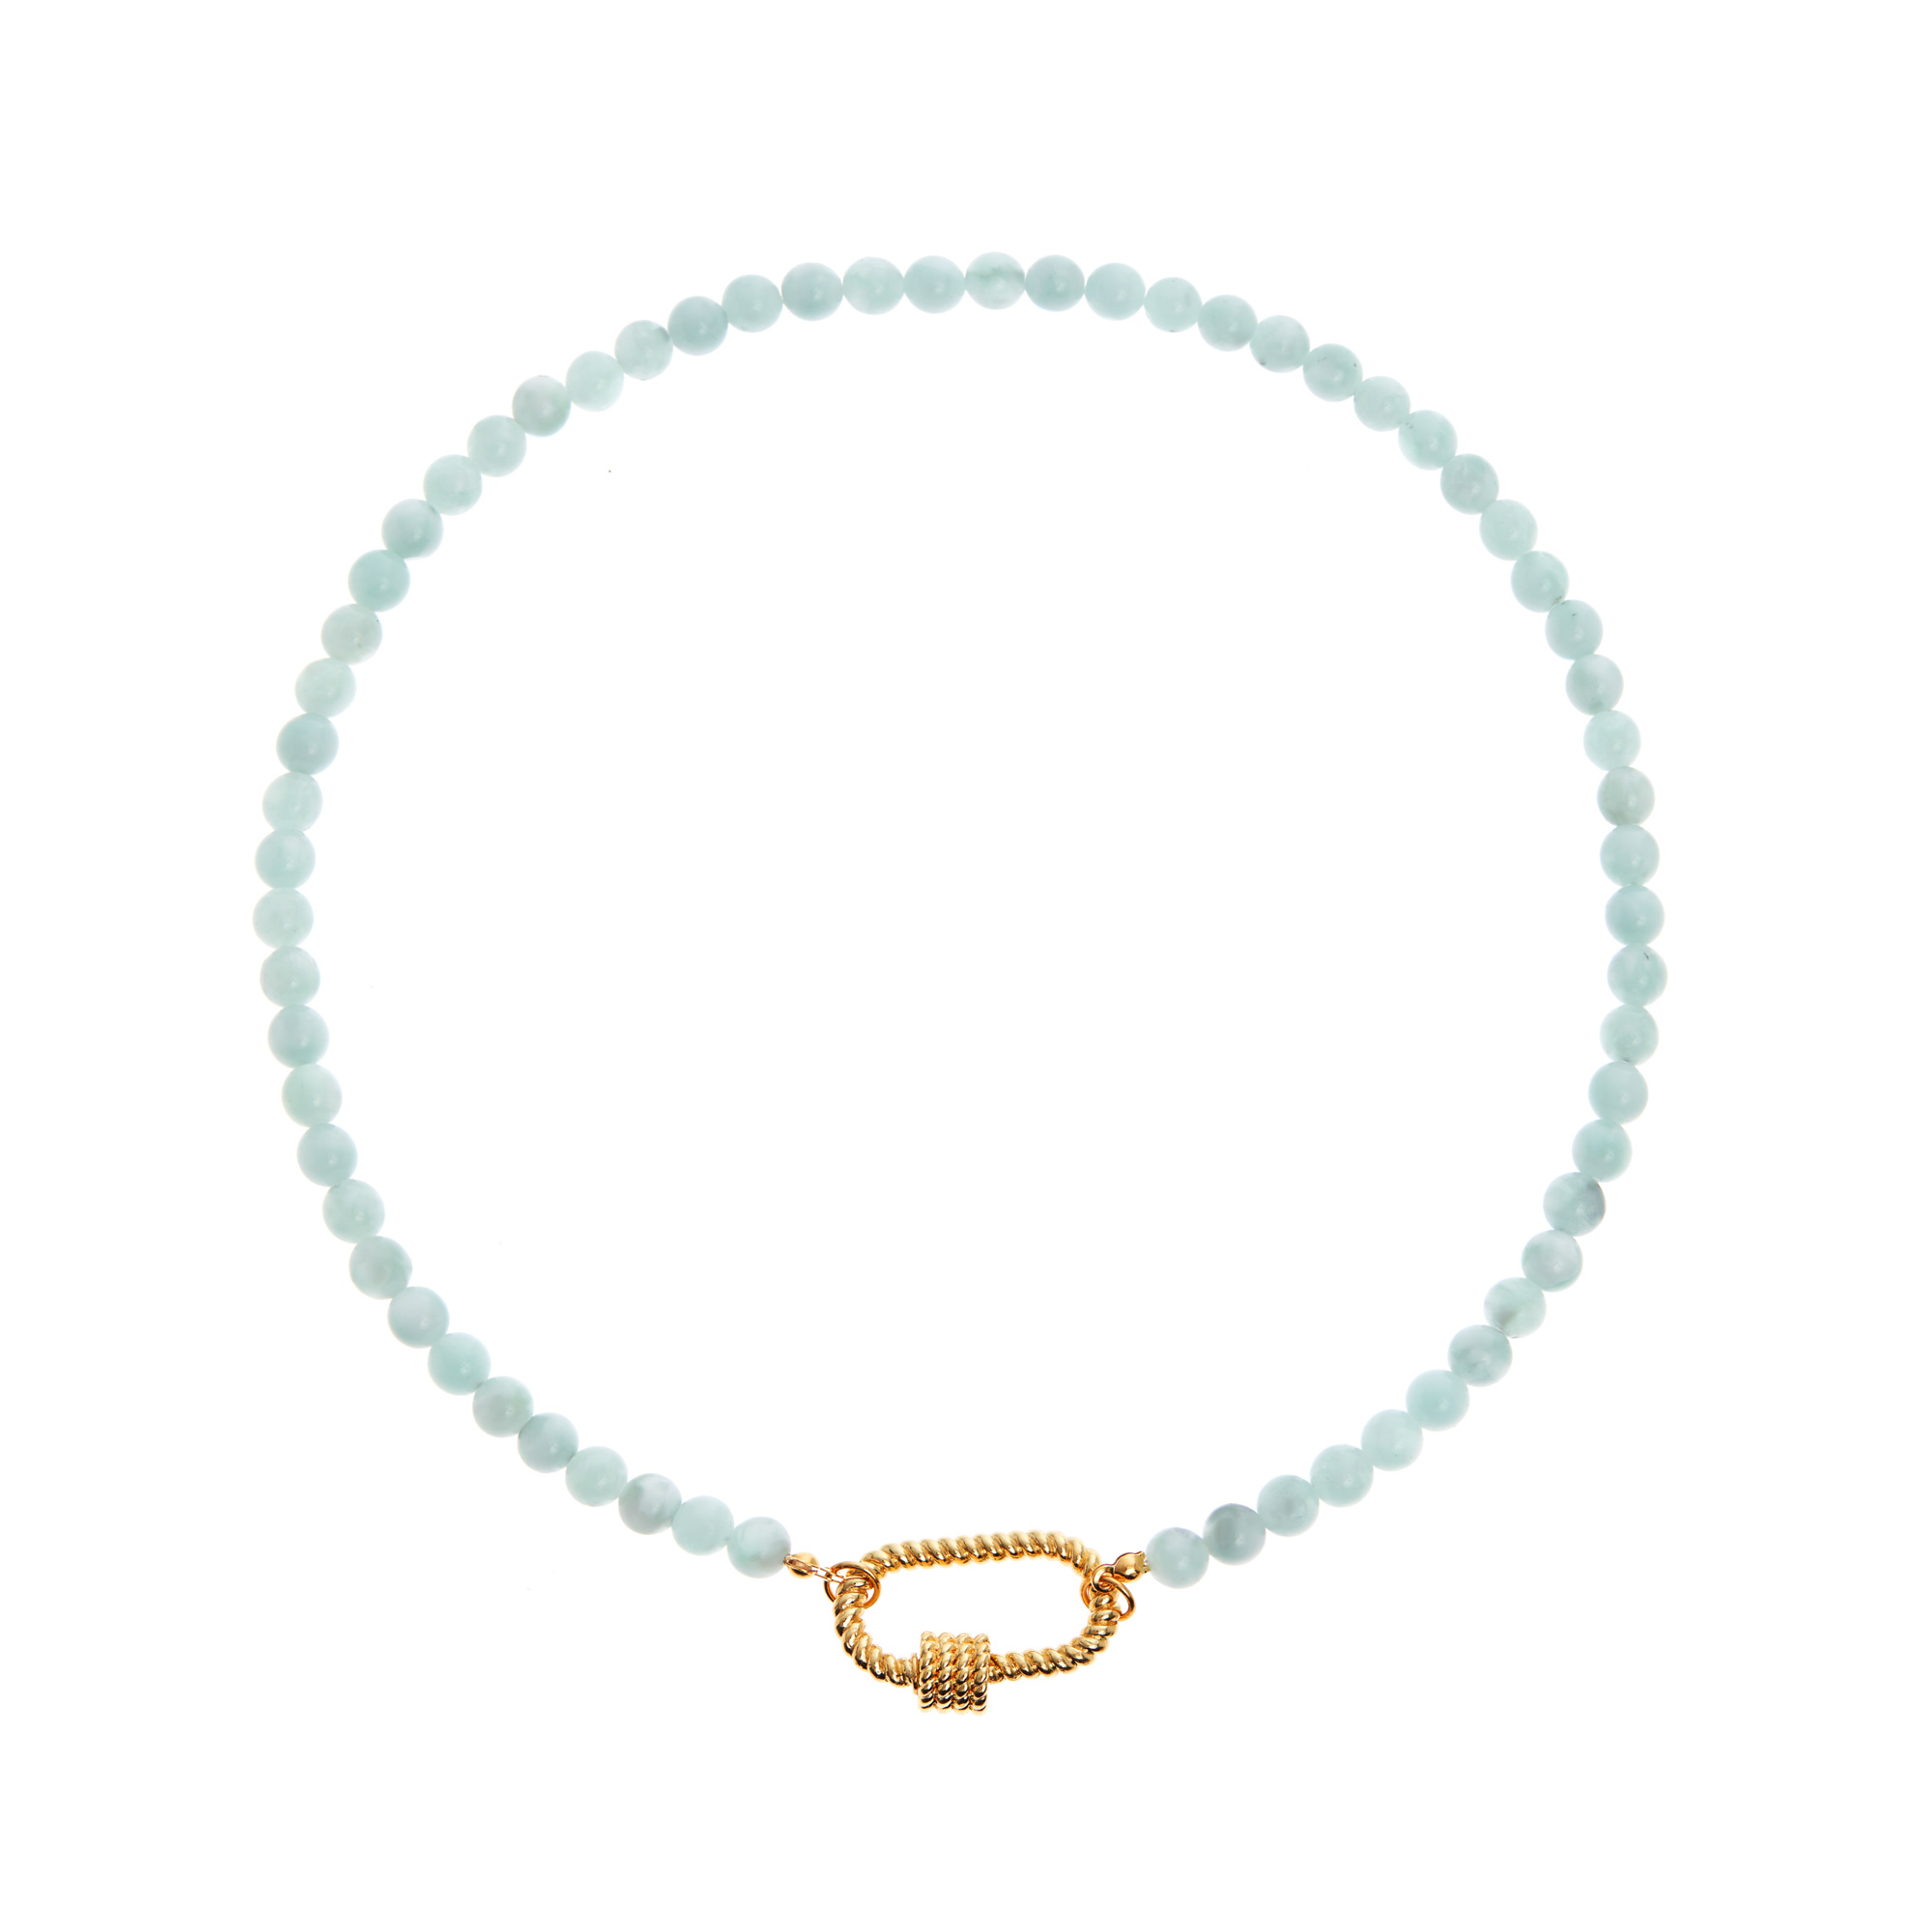 HOLLY JUNE Колье Carabiner Gold Anggelos Necklace колье holly june carabiner necklace turquoise